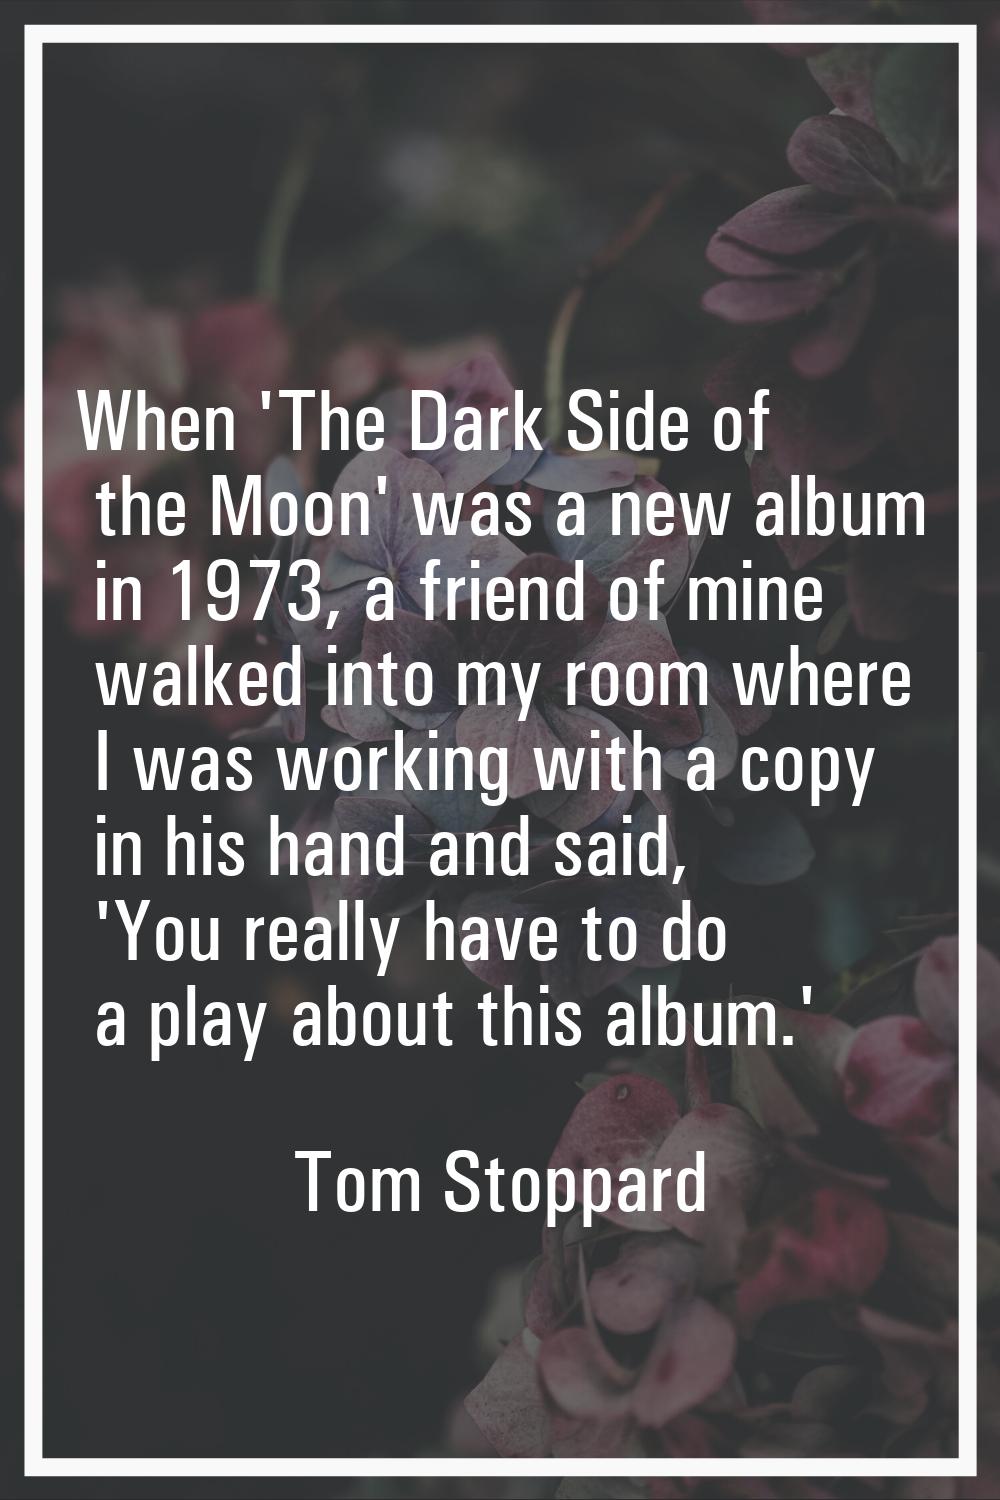 When 'The Dark Side of the Moon' was a new album in 1973, a friend of mine walked into my room wher